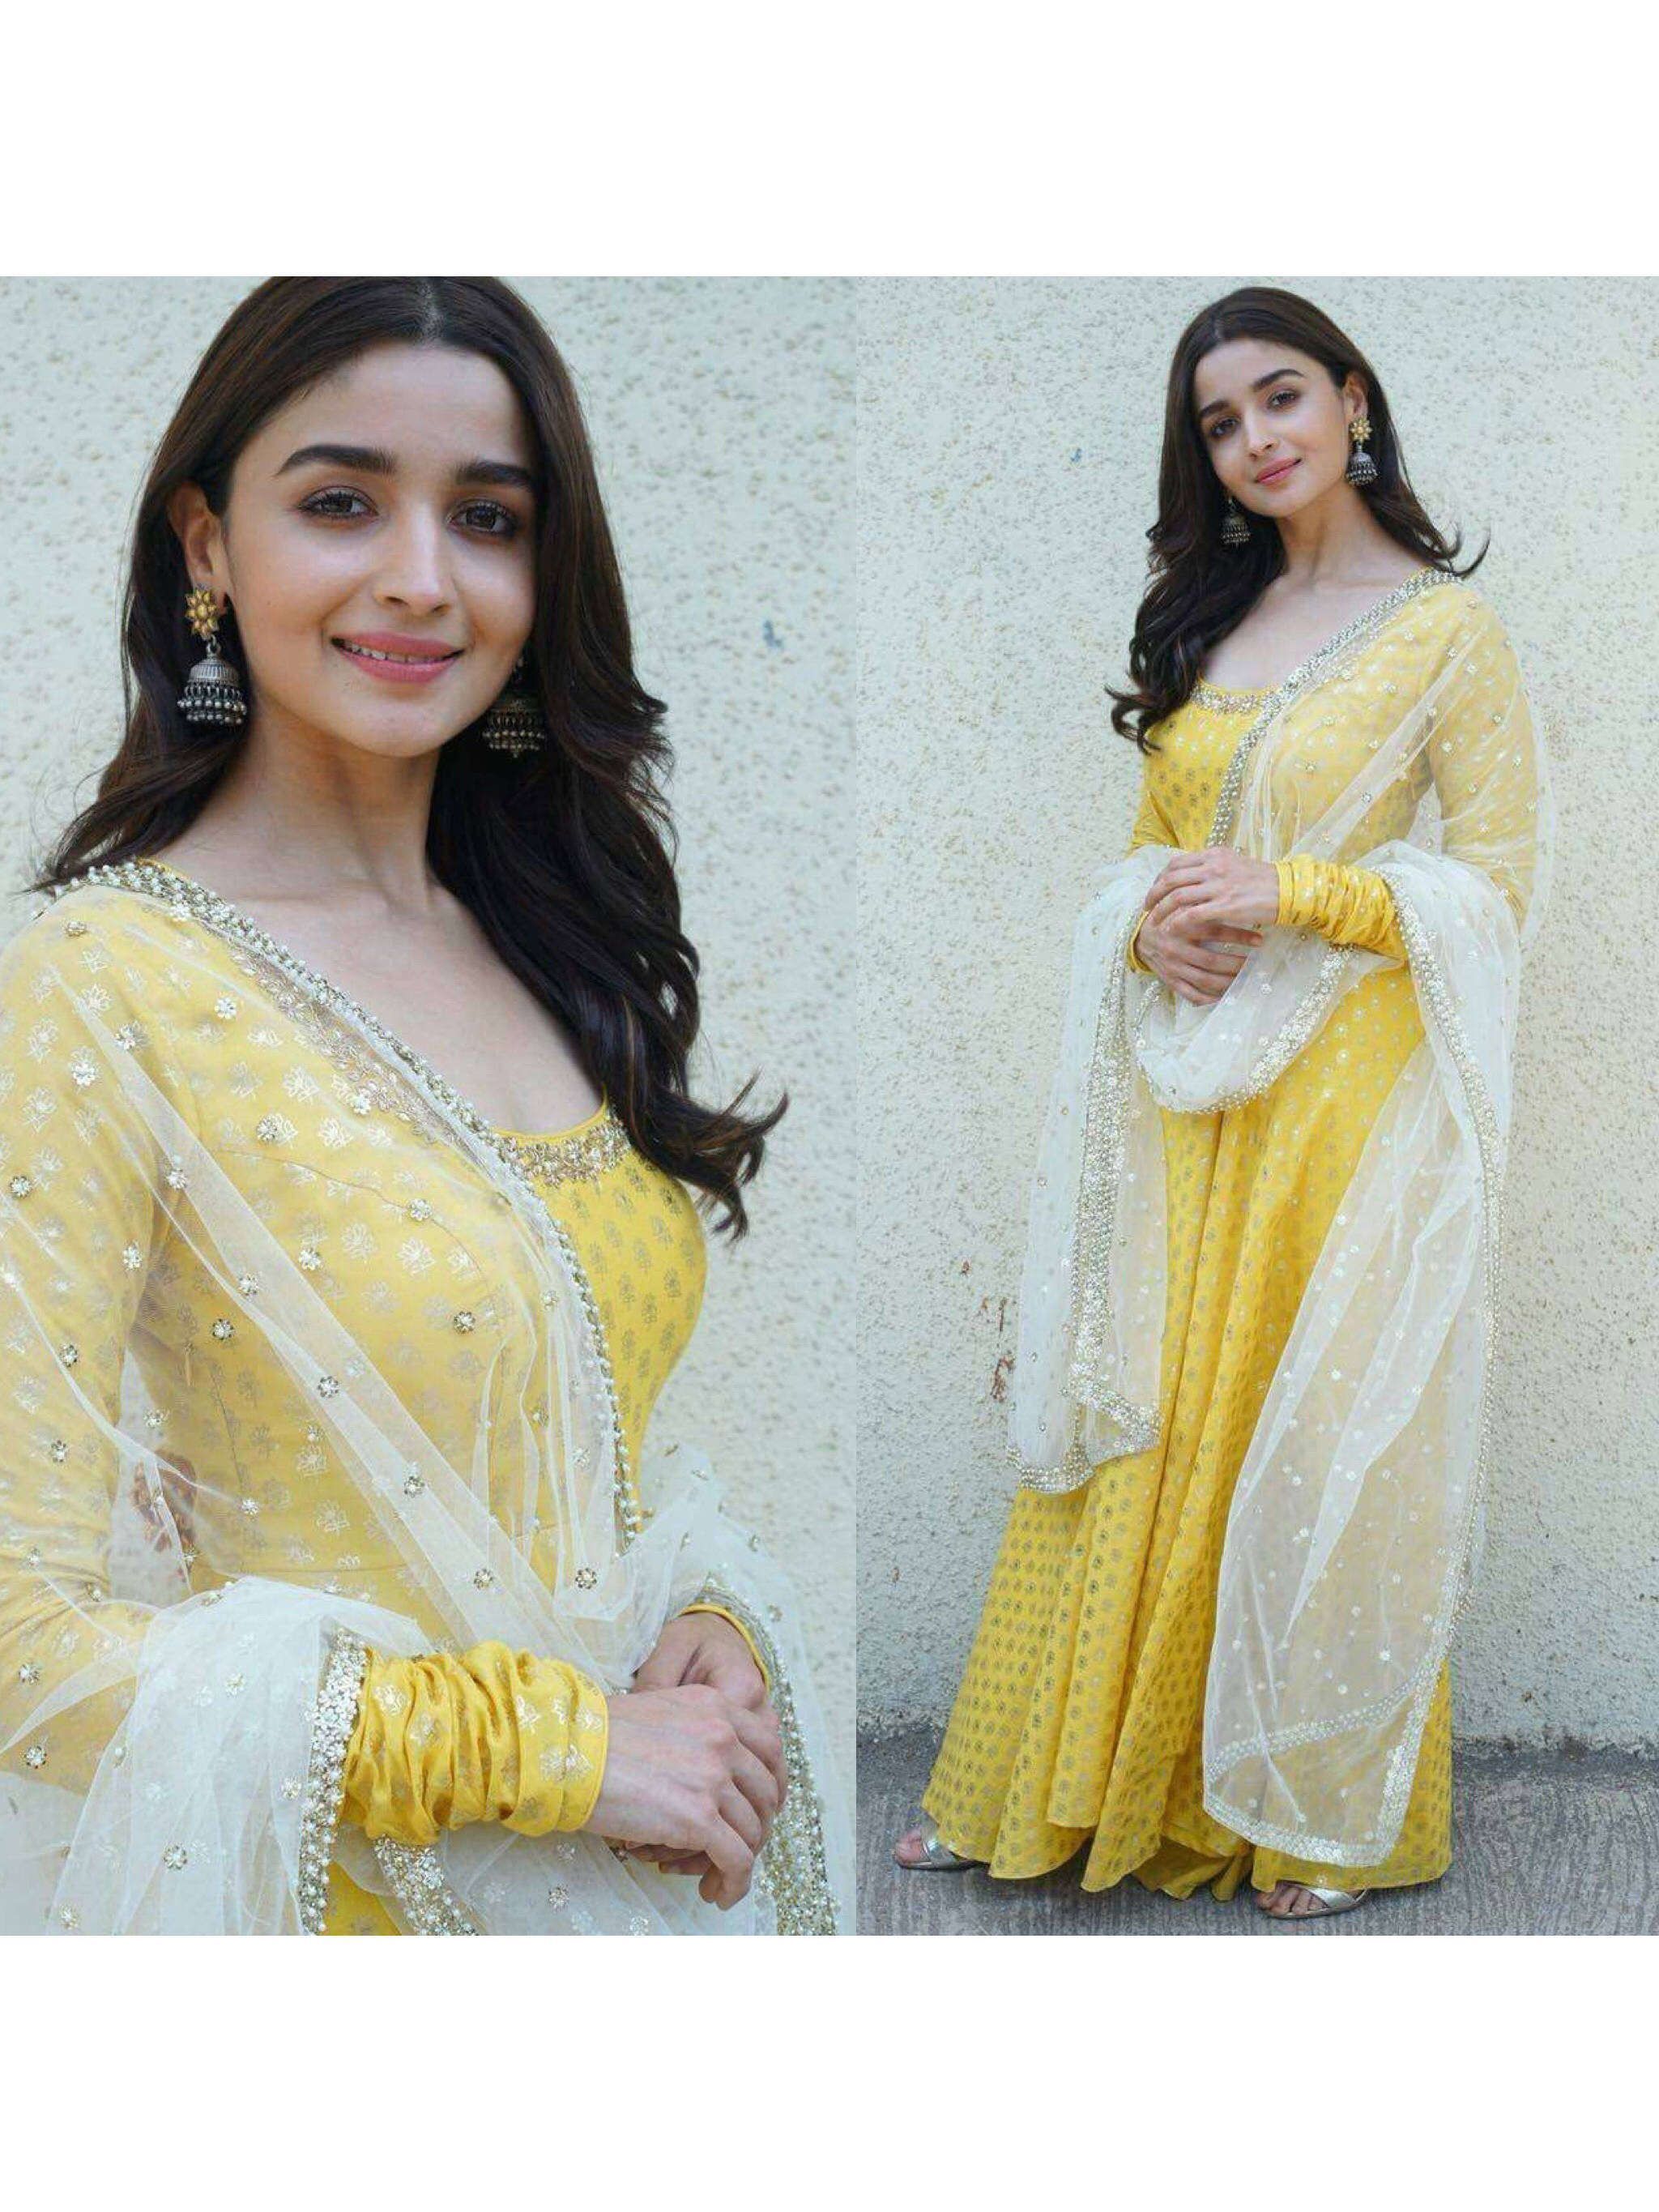 Alia Bhatt Amps Up Glam Quotient In Sequinned Yellow Dress, Check Out Her  Ravishing Pictures - News18